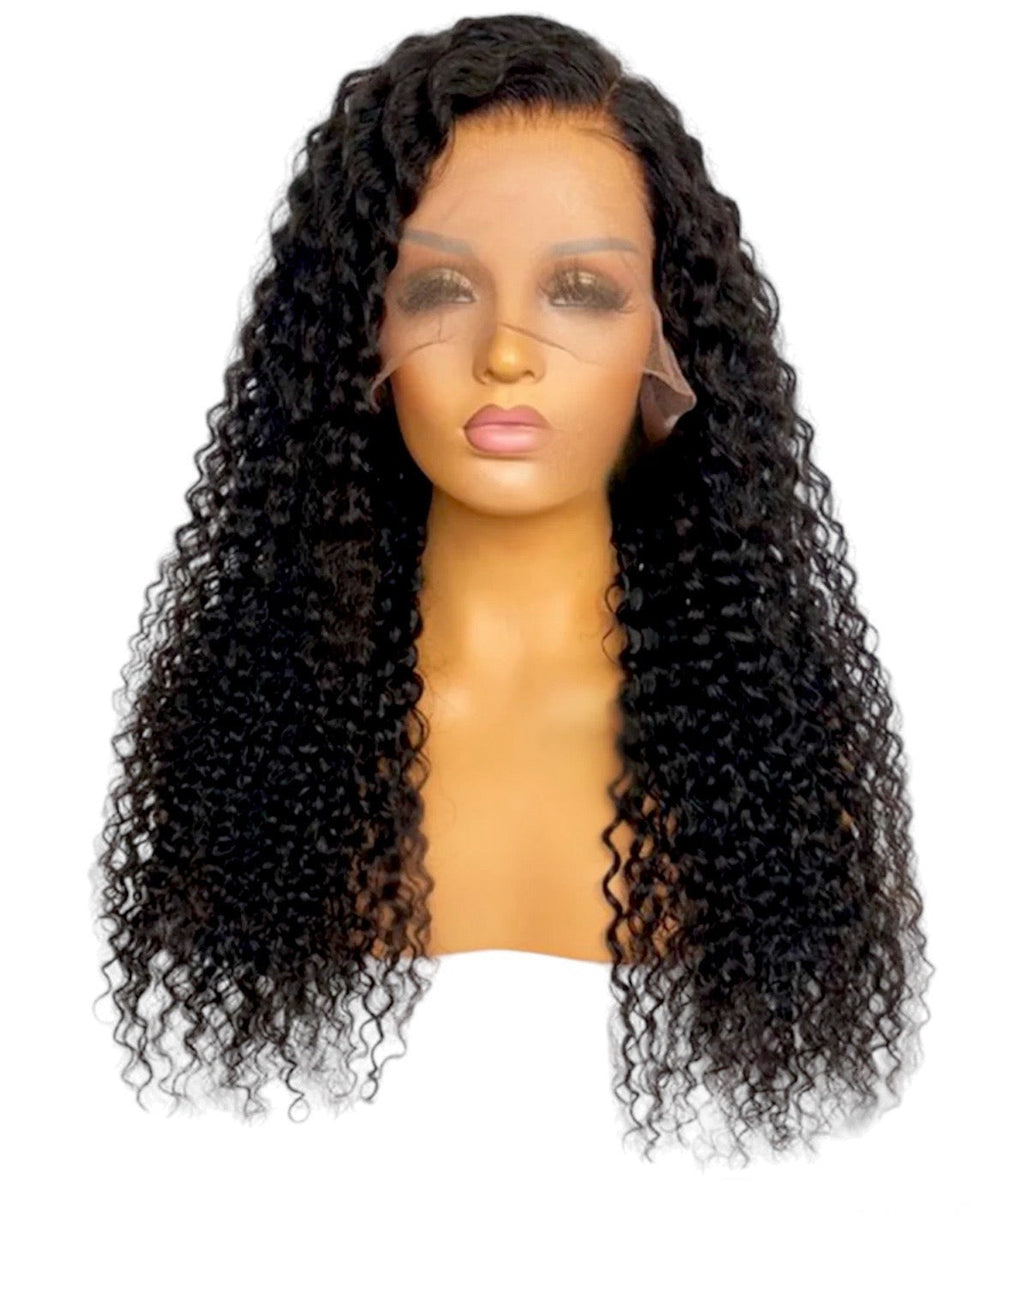 CURLY 13X6 TRANSPARENT LACE FRONT WIGS